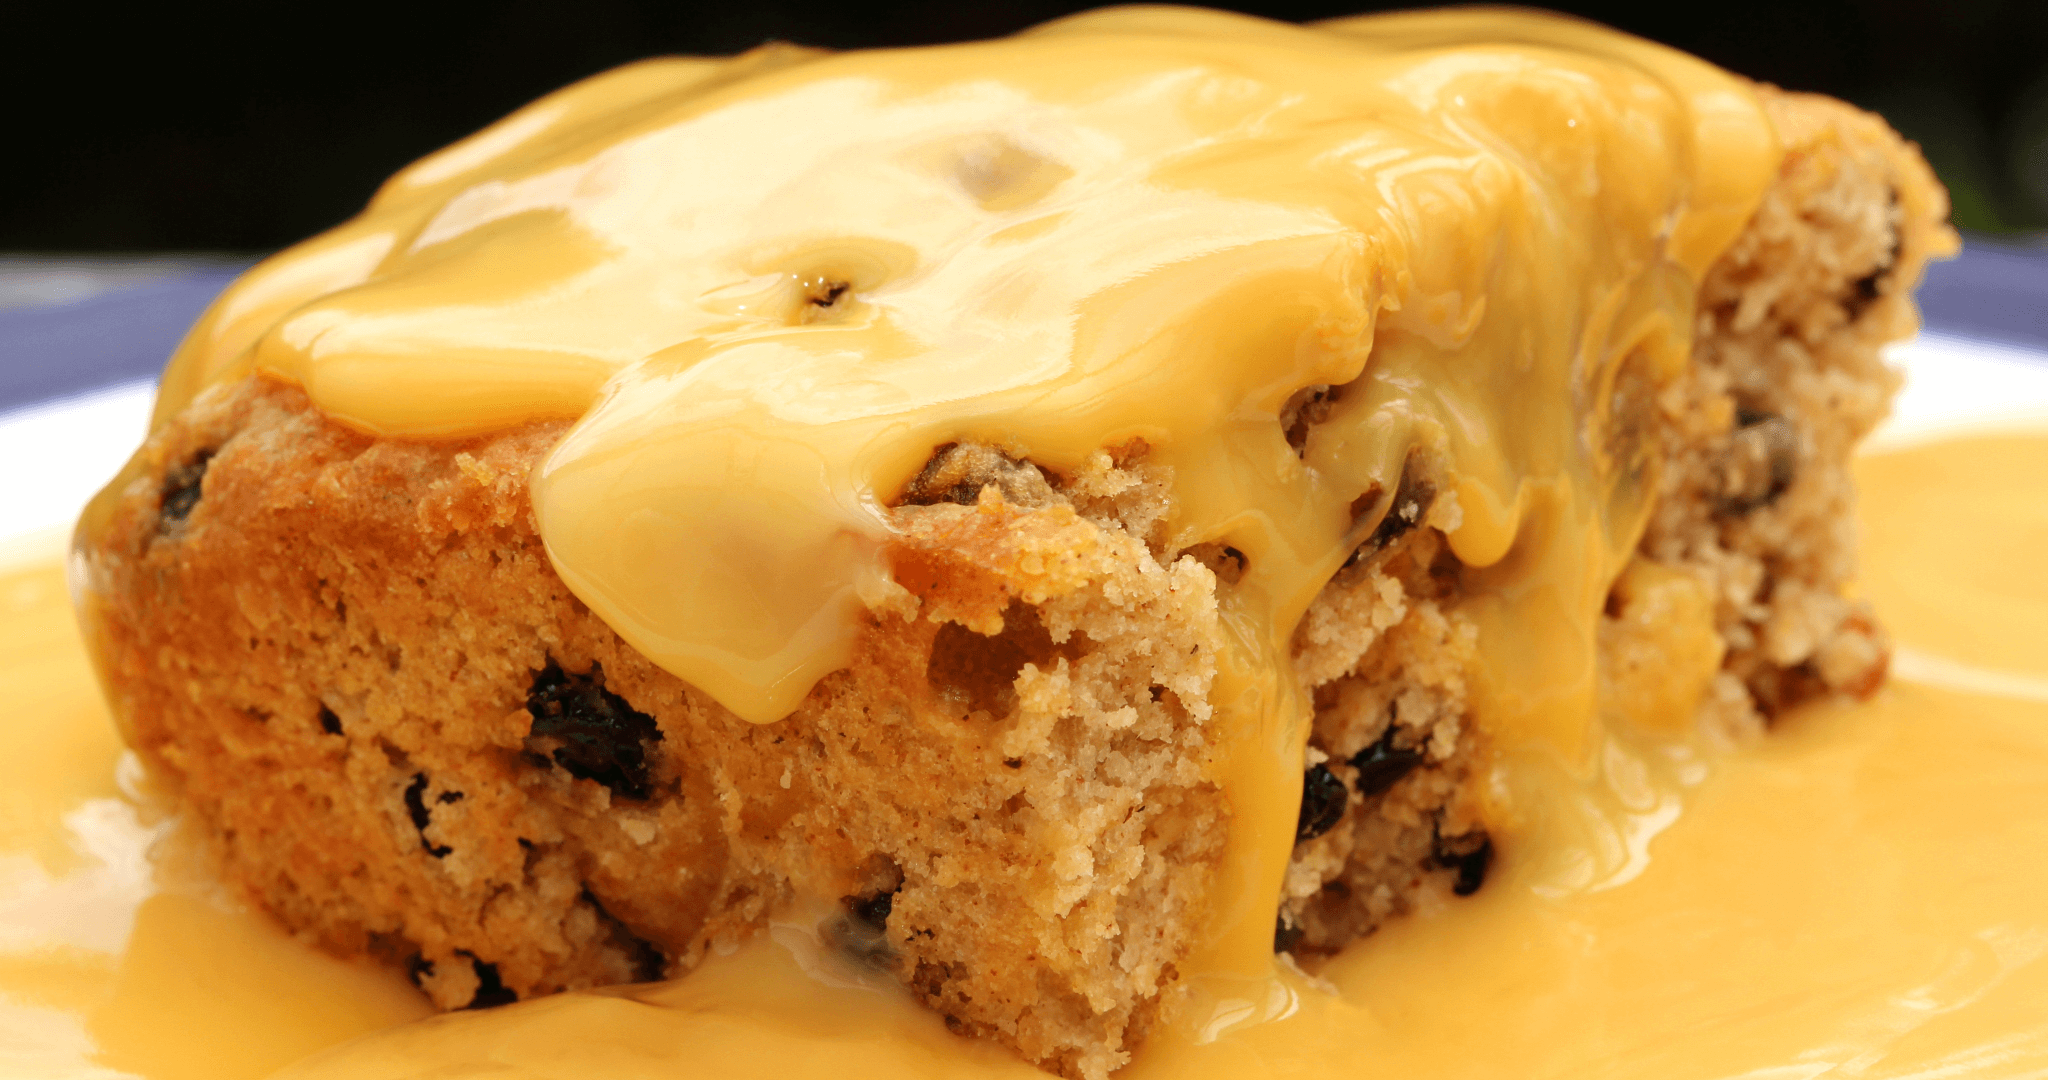 portion of spotted dick with custard